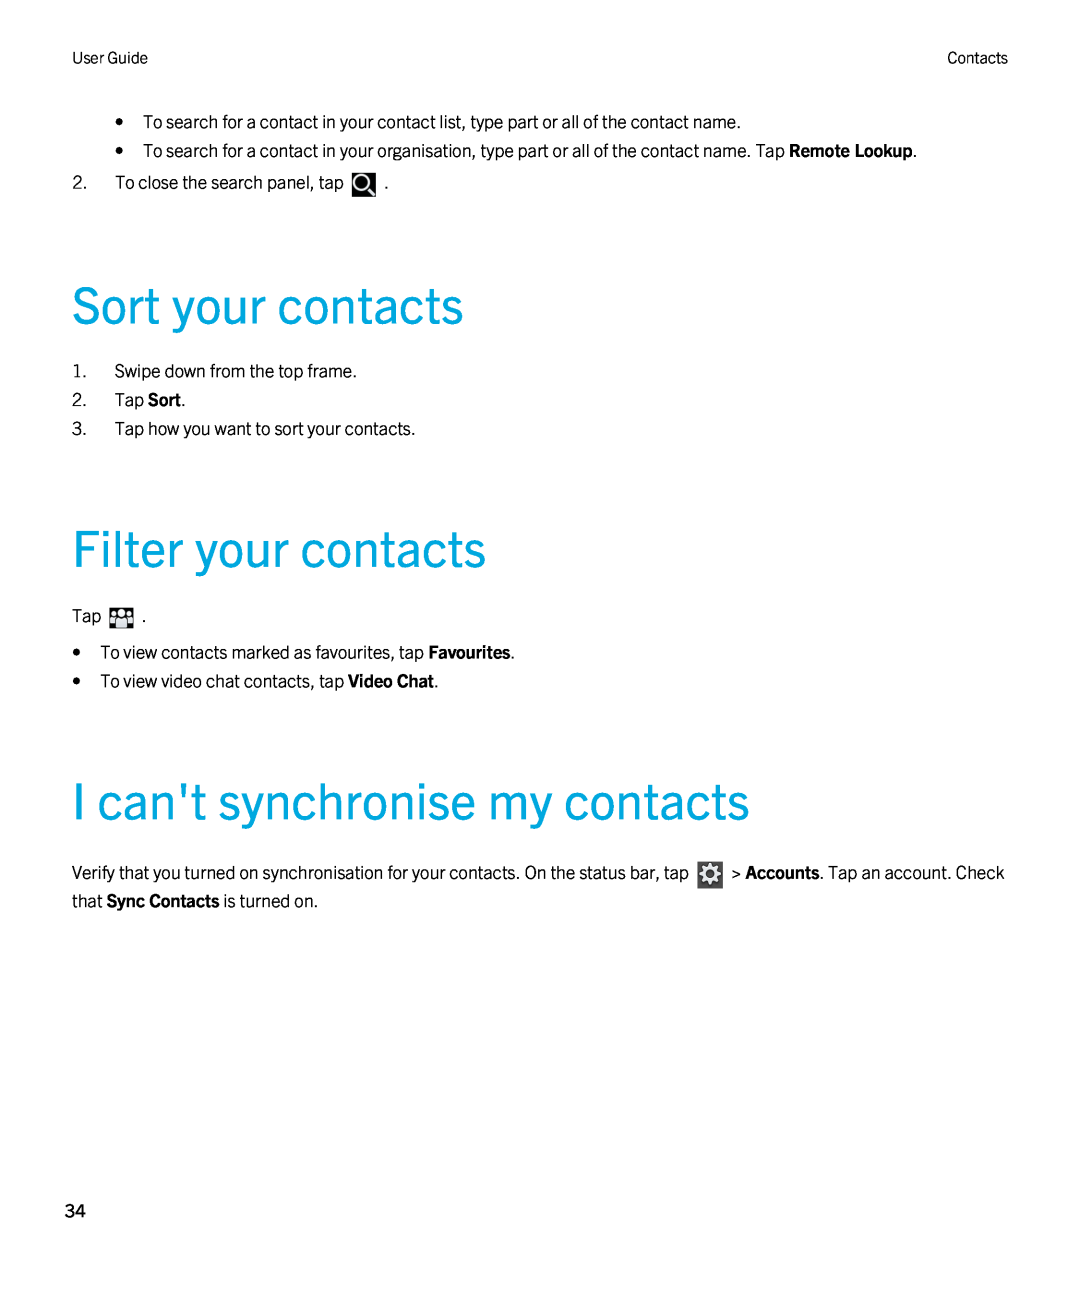 Blackberry 2.0.1 manual Sort your contacts, Filter your contacts, I cant synchronise my contacts 